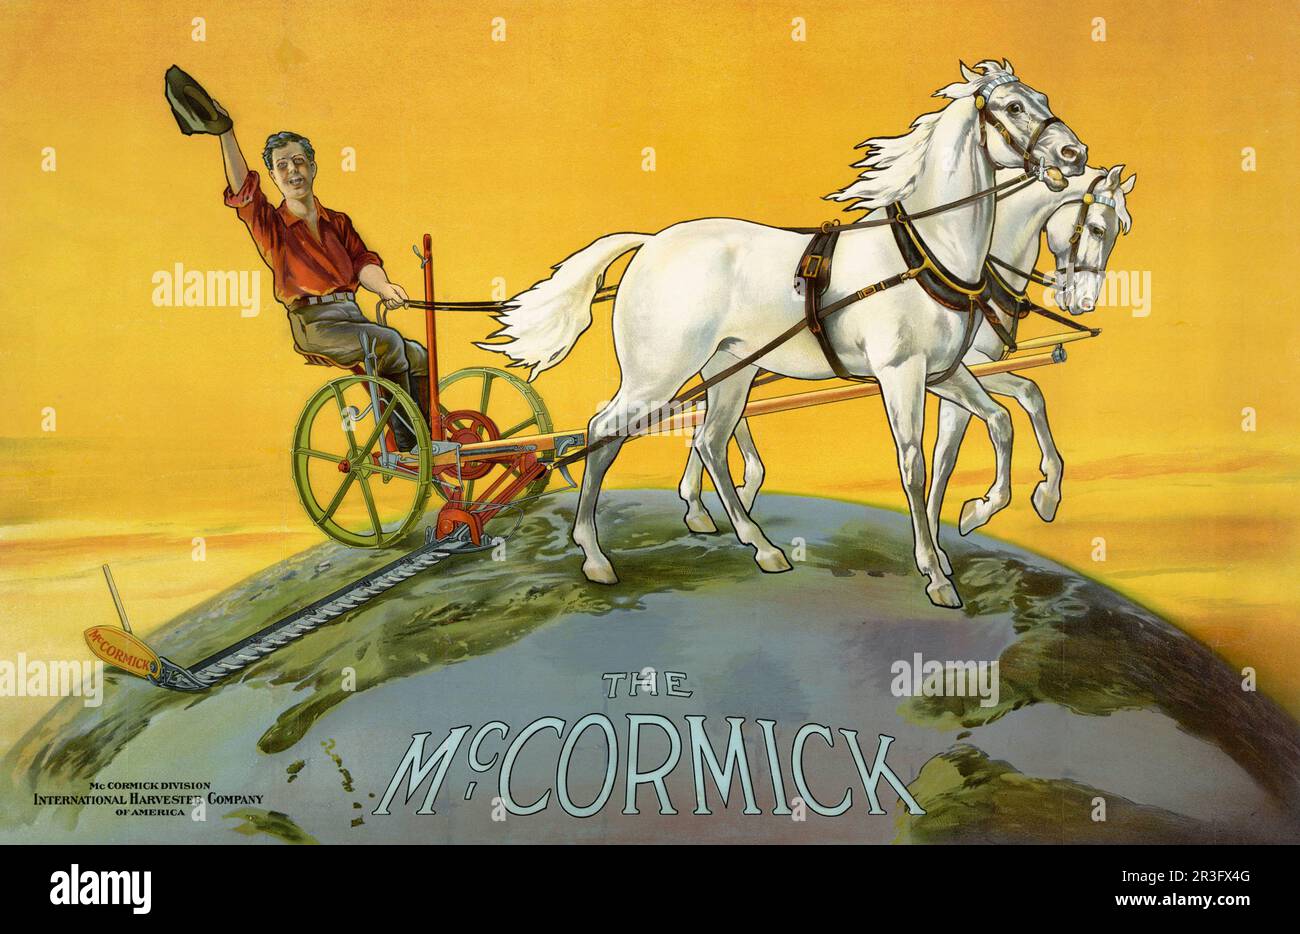 Vintage advertisement of a farmer operating agricultural machinery for the McCormick division of the International Harvester Company. Stock Photo